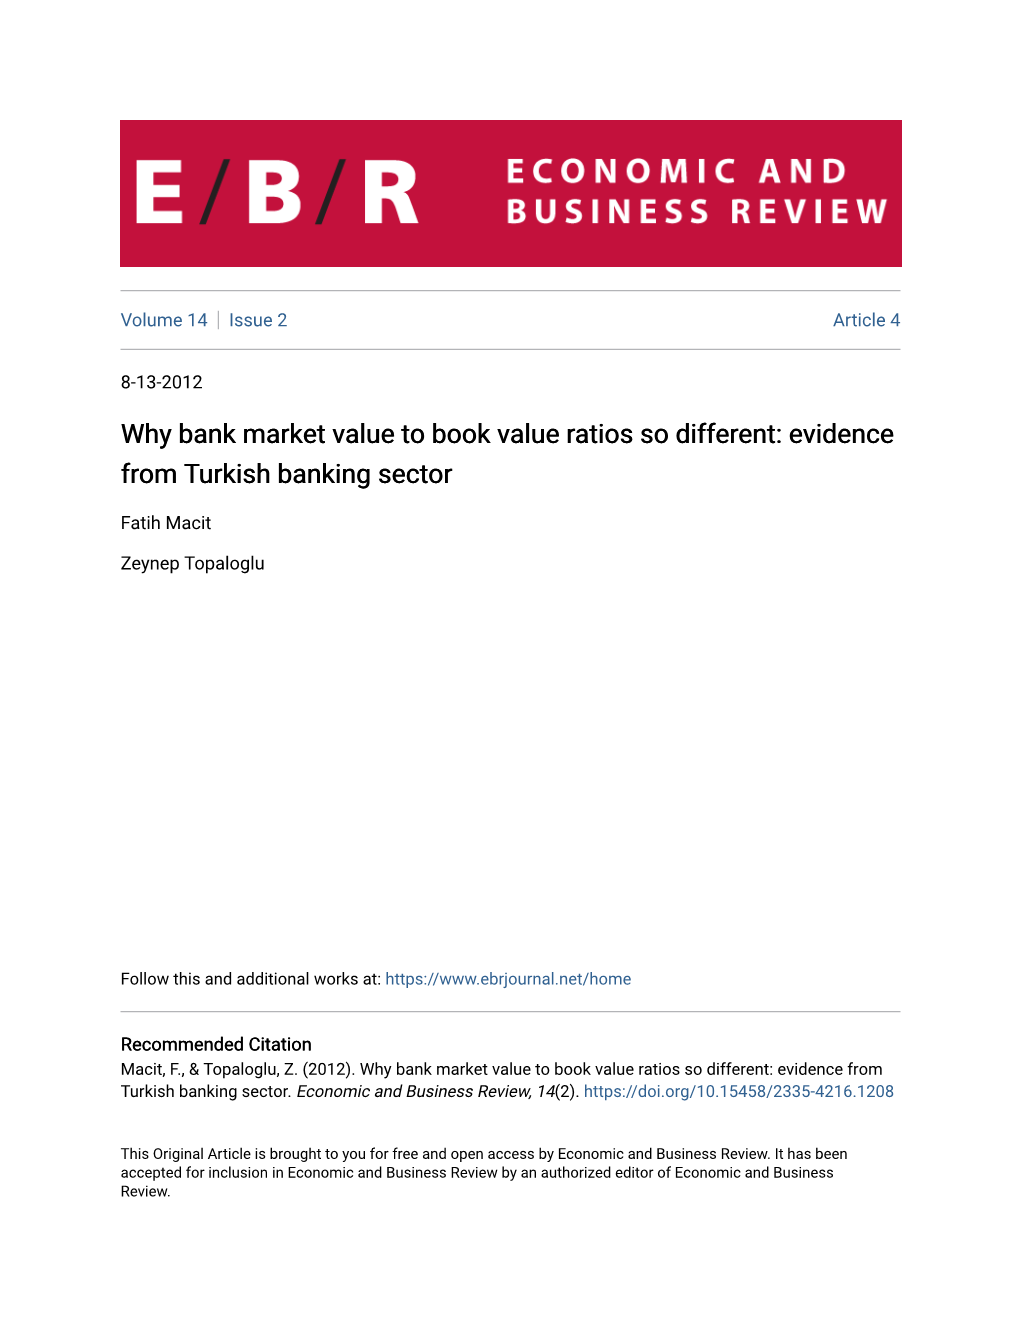 Evidence from Turkish Banking Sector